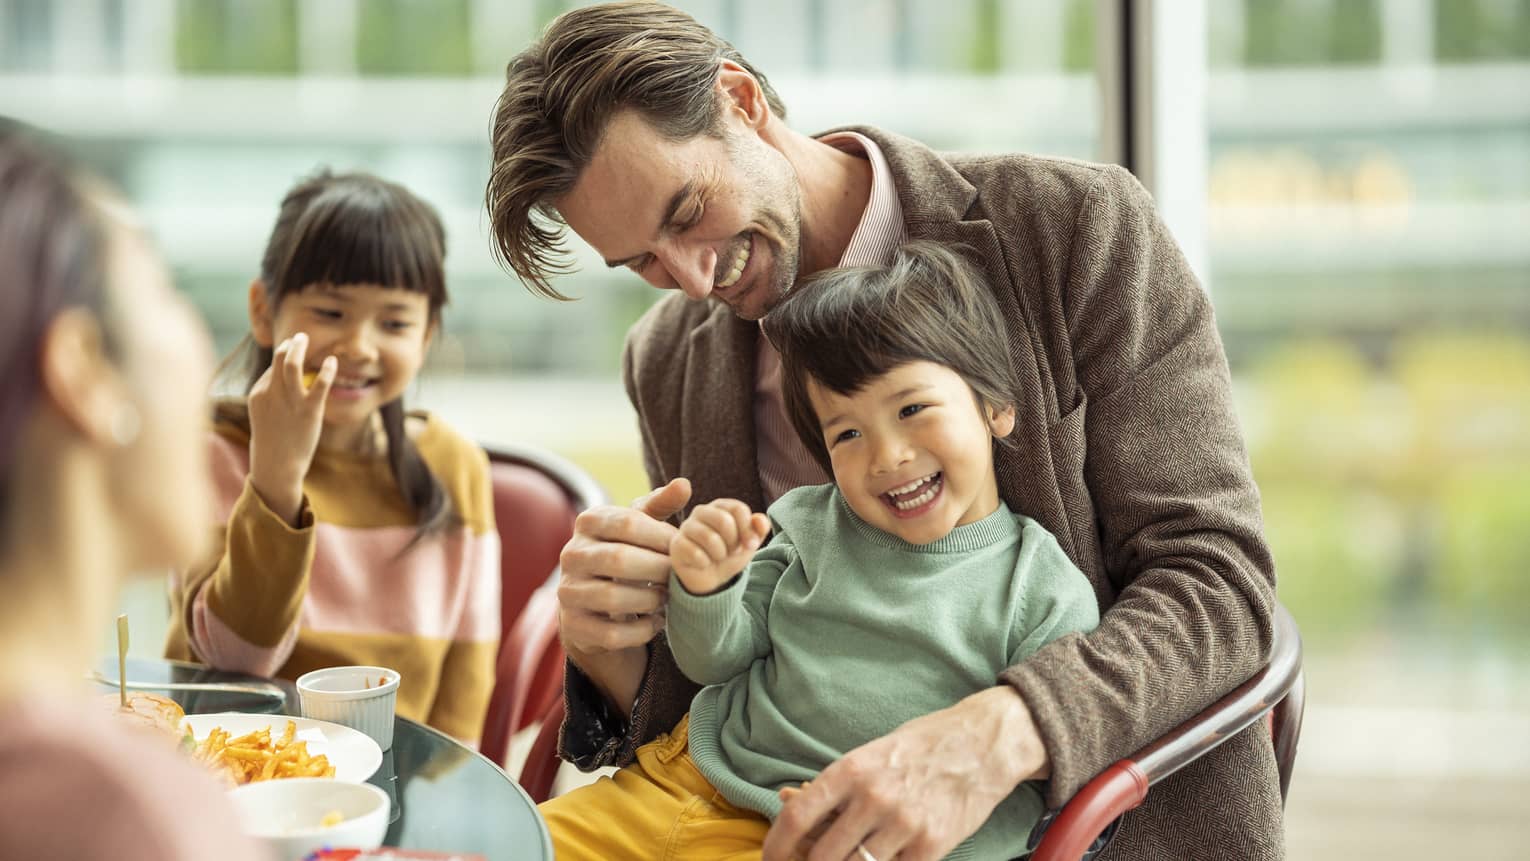 Laughing couple and kids enjoy a meal together